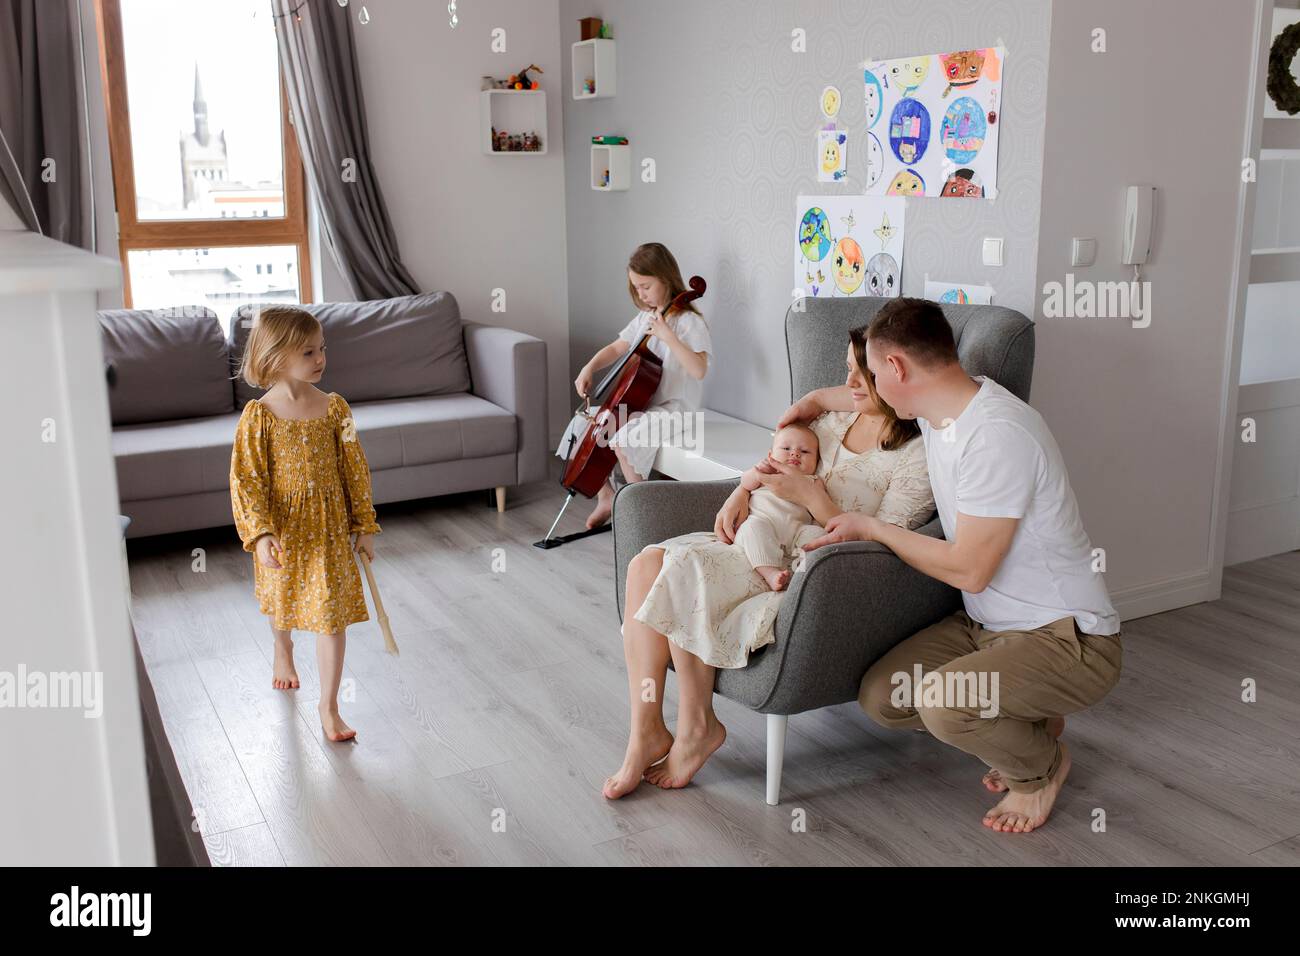 Parents holding boy with girl playing musical instrument in background Stock Photo